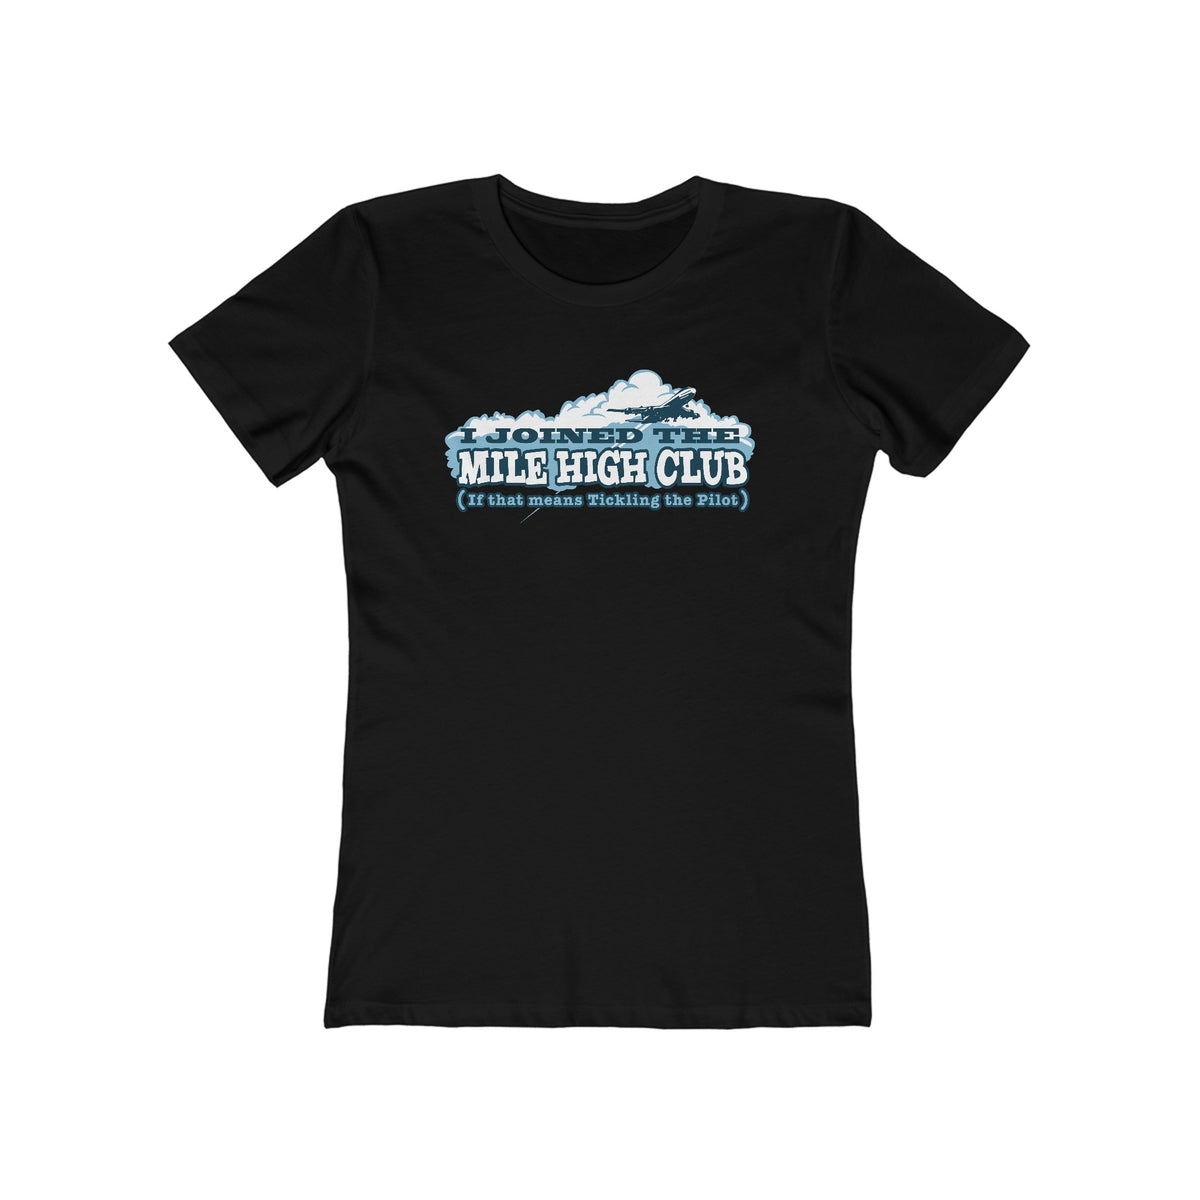 I Joined The Mile High Club (If That Means Tickling The Pilot) - Women’s T-Shirt